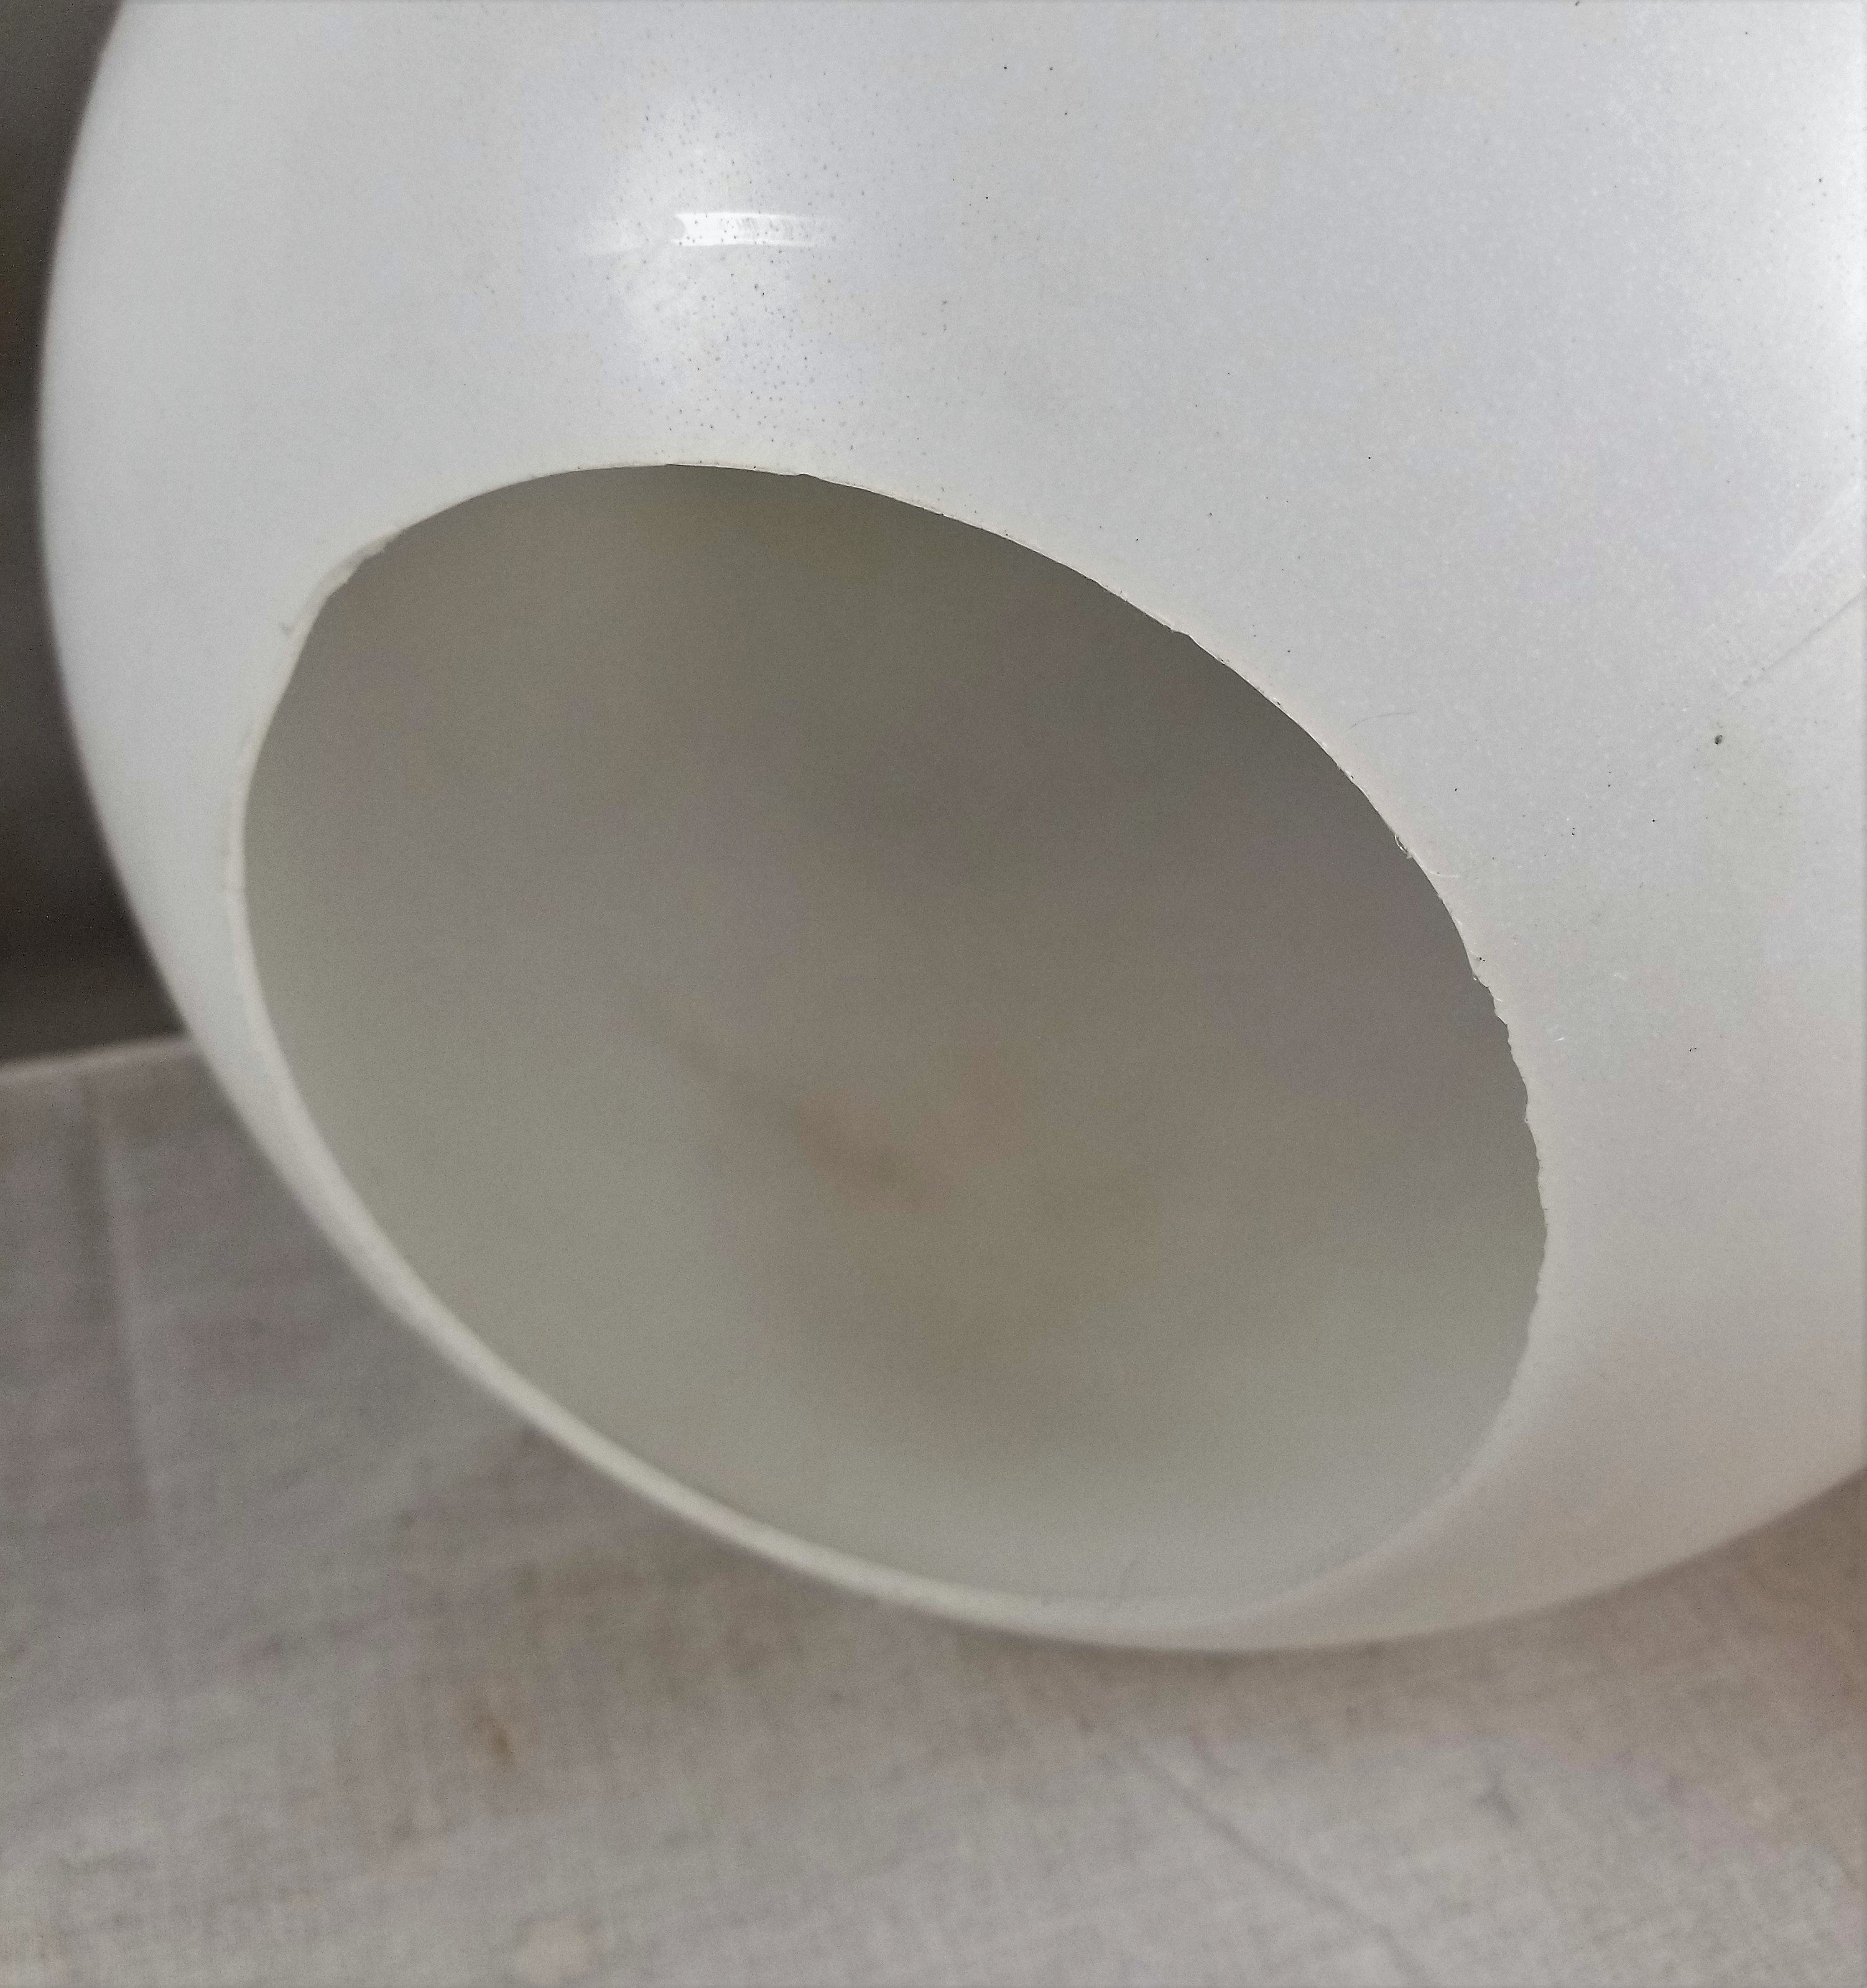 18" Neckless Plastic Globe with a 5-1/4" Hole (see more description)